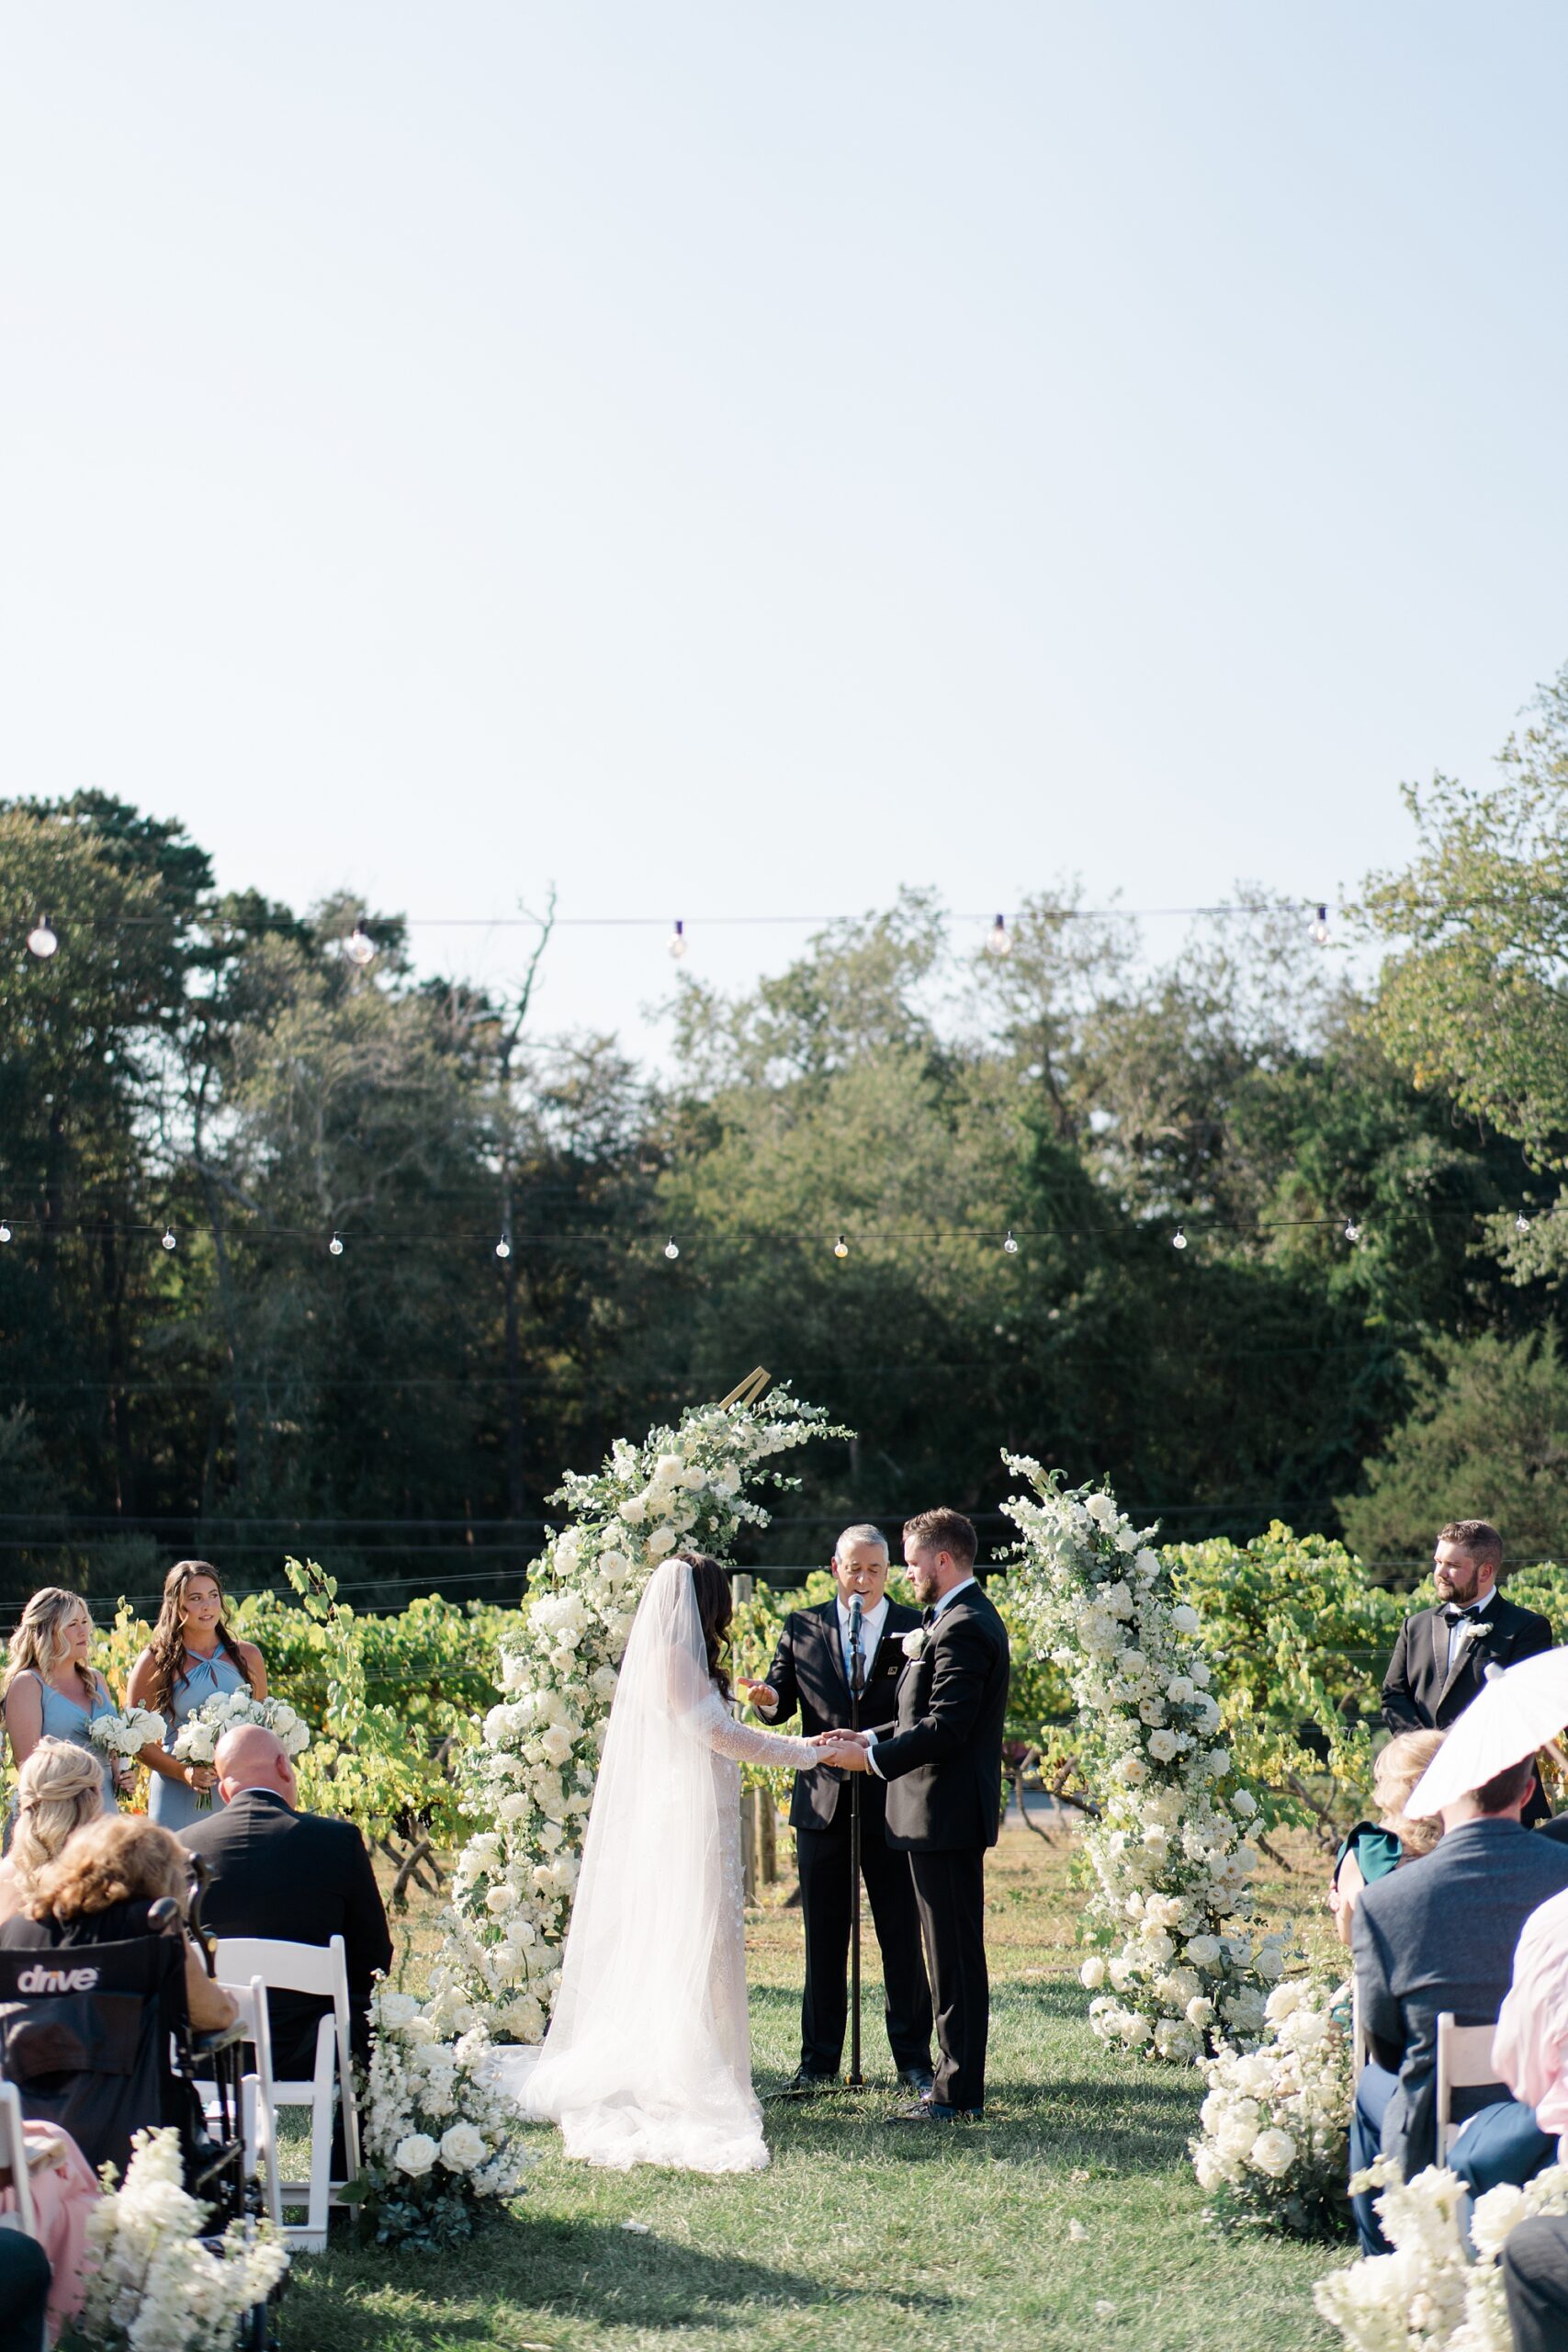 outdoor wedding ceremony at Renault Winery in the vineyard